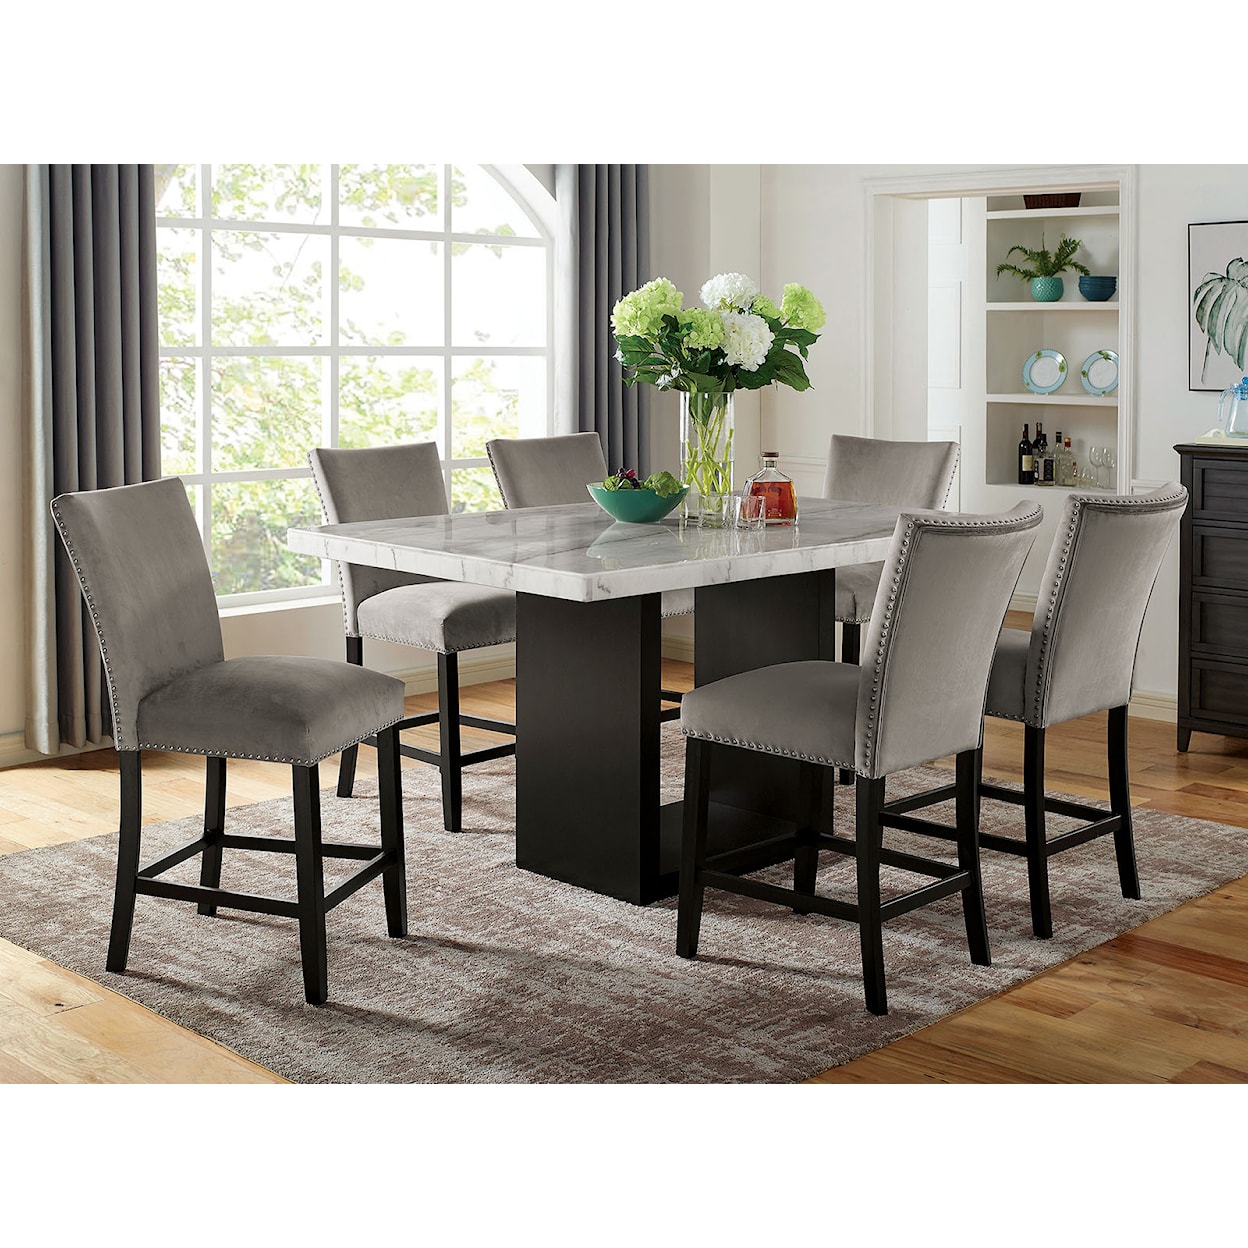 Furniture of America Kian 7-Piece Counter Height Dining Table Set